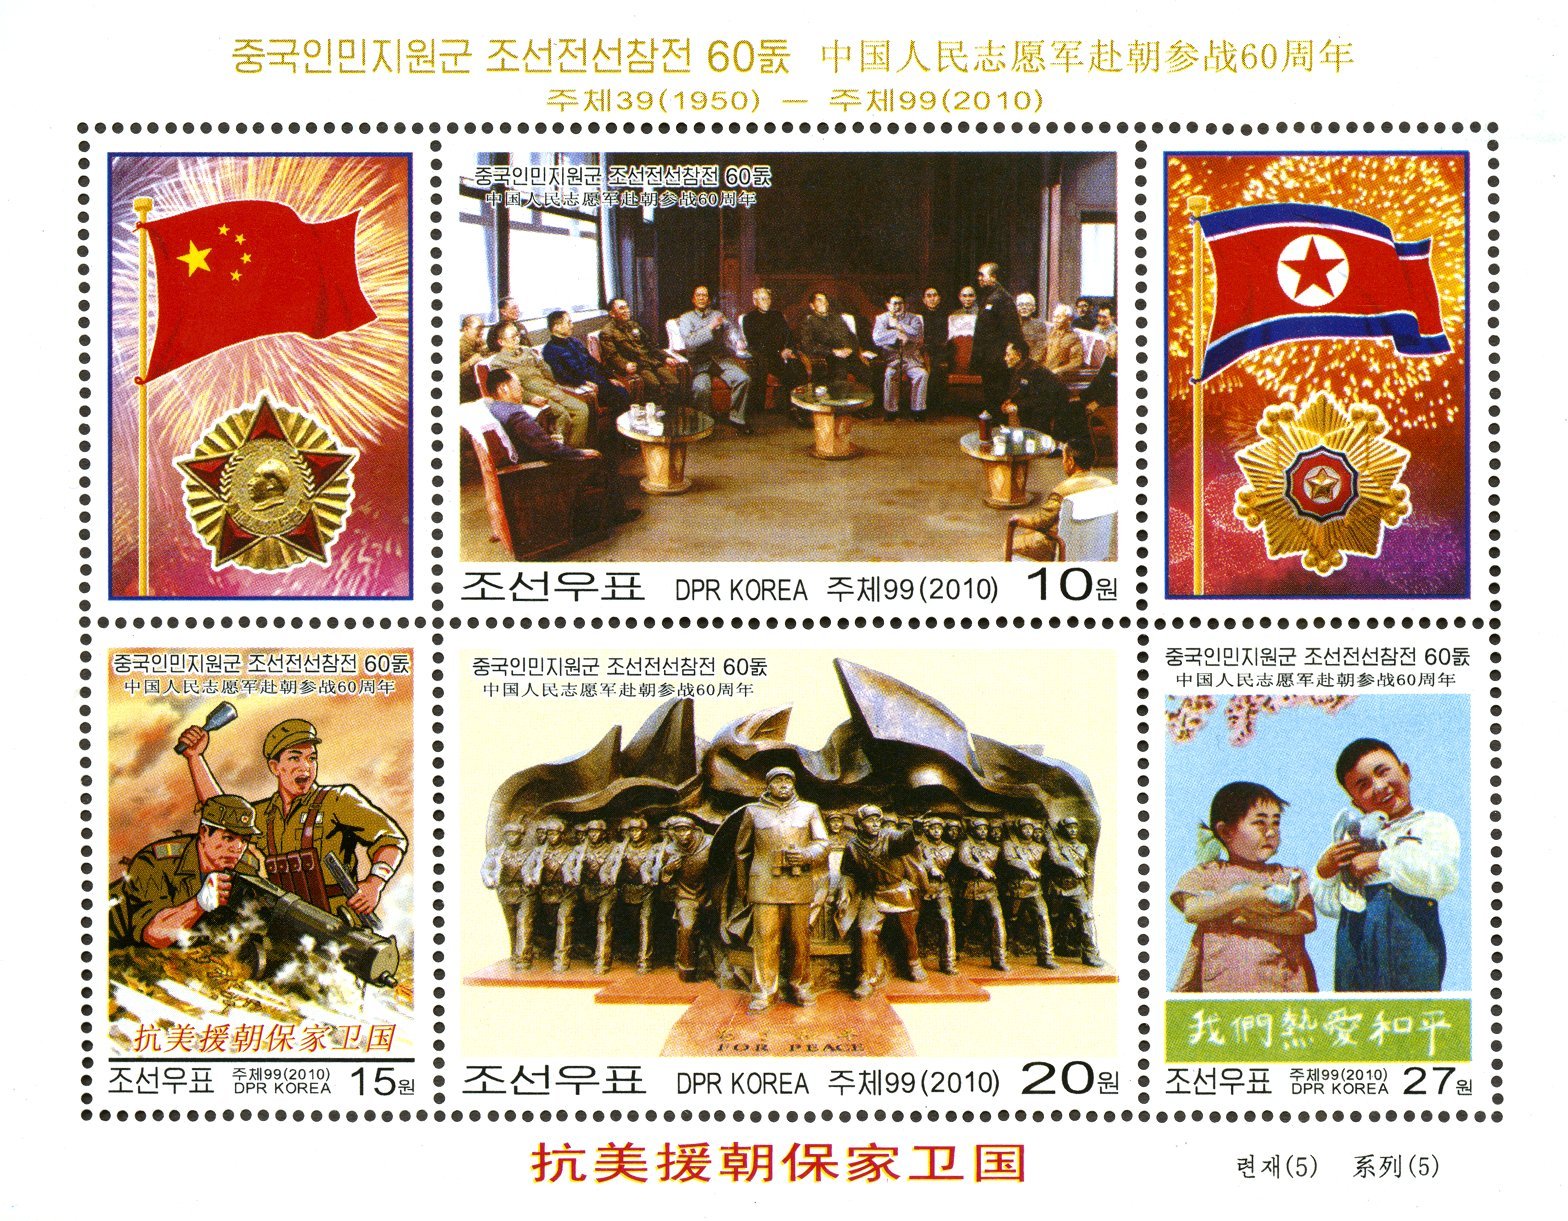 Six prints show various nationalistic scenes: a statue commemorating war heroes, two military men operating a large gun, a meeting of suited men, two children holding birds, and fireworks behind the Chinese and North Korean flags.